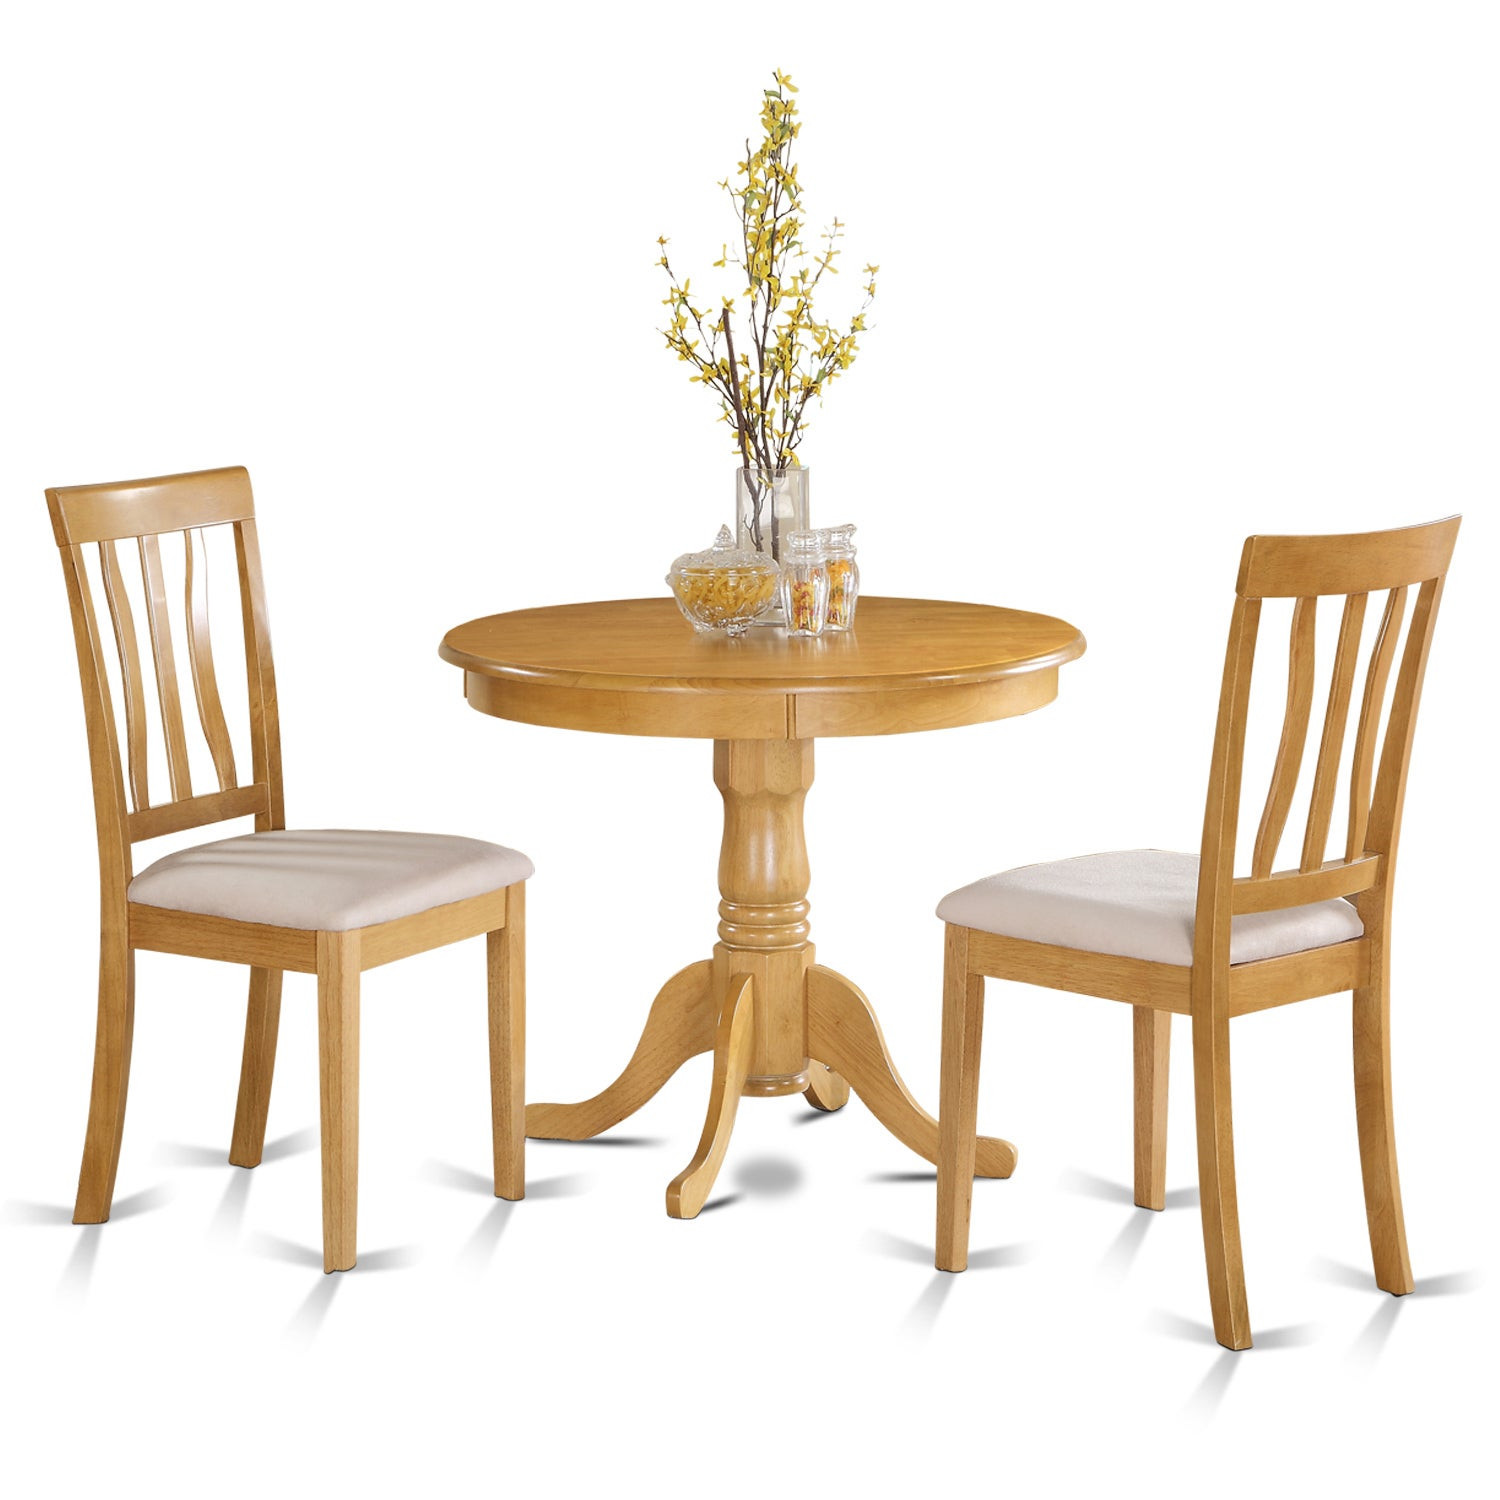 Small Kitchen Dining Sets
 Oak Small Kitchen Table Plus 2 Chairs 3 piece Dining Set